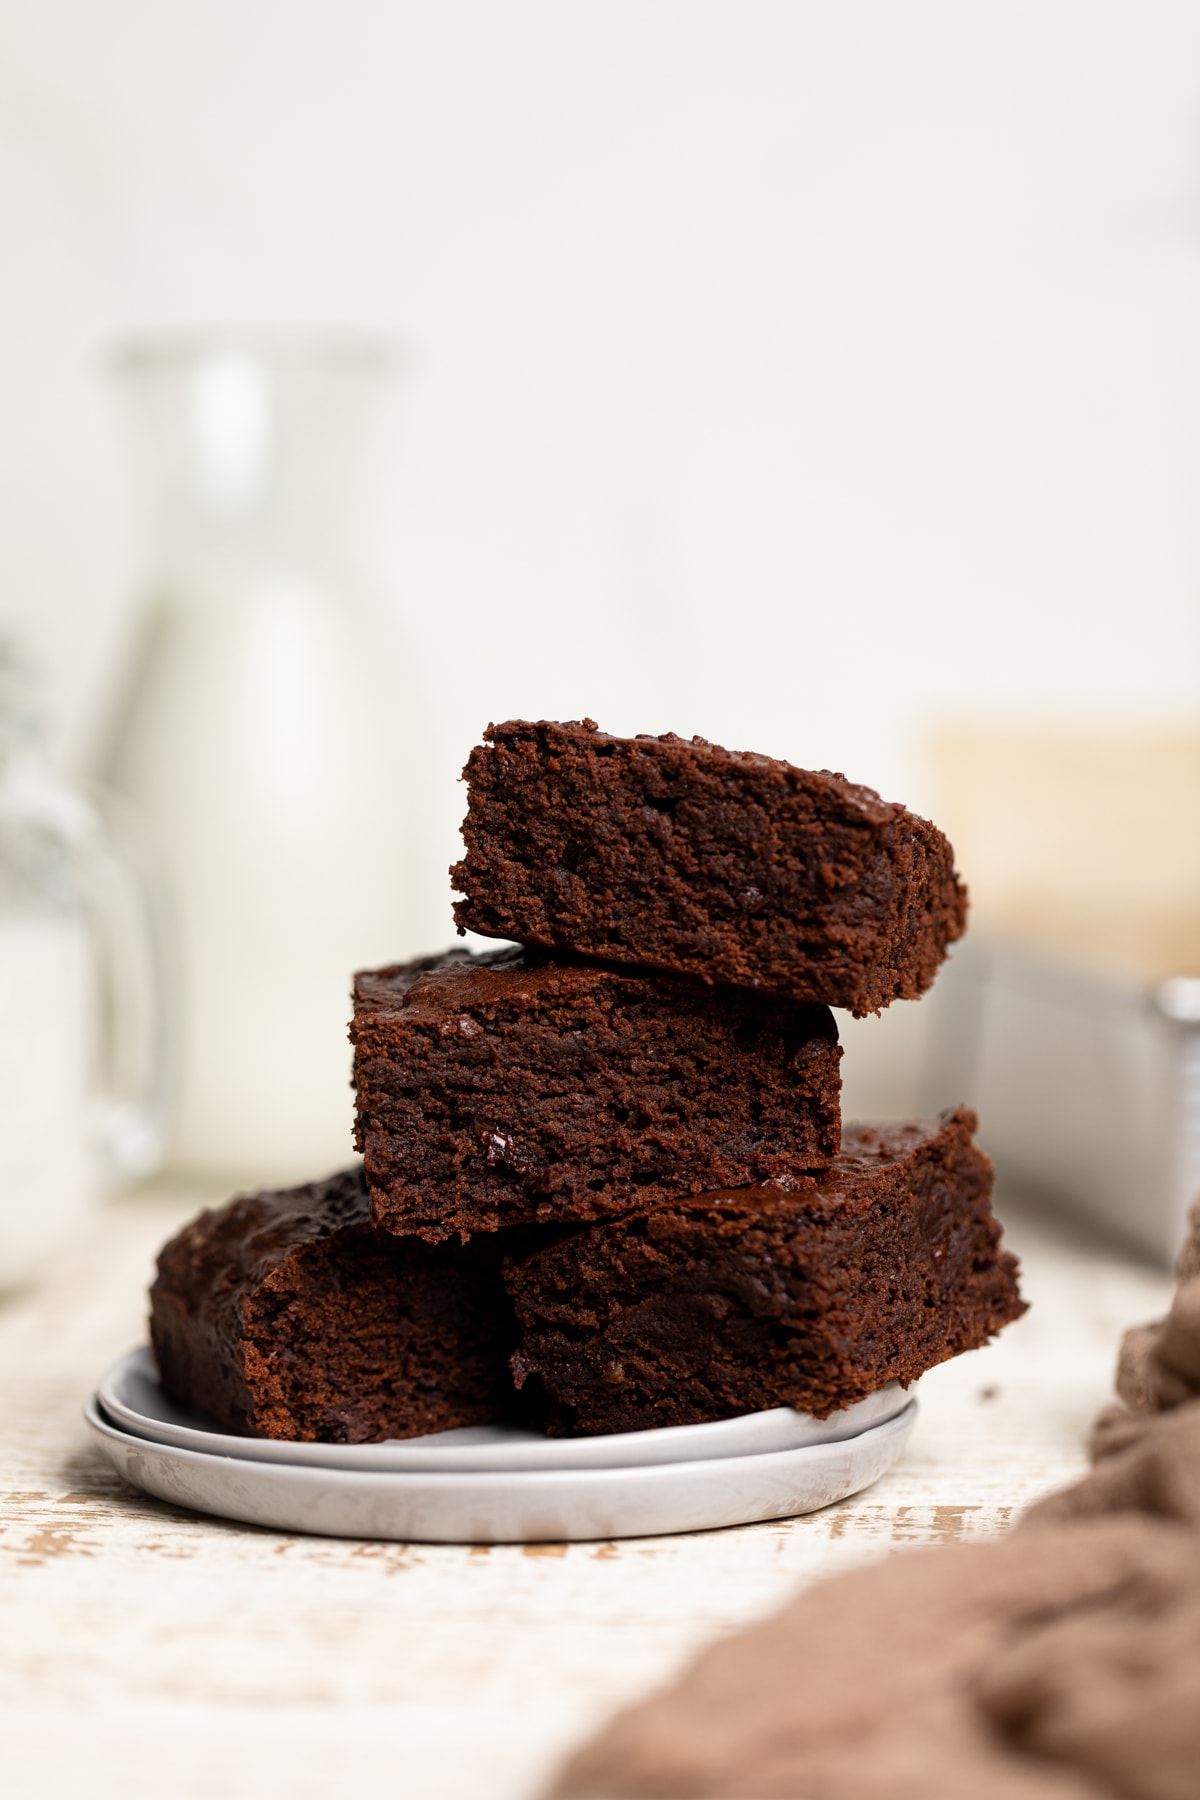 A stack of baked chocolate squares.